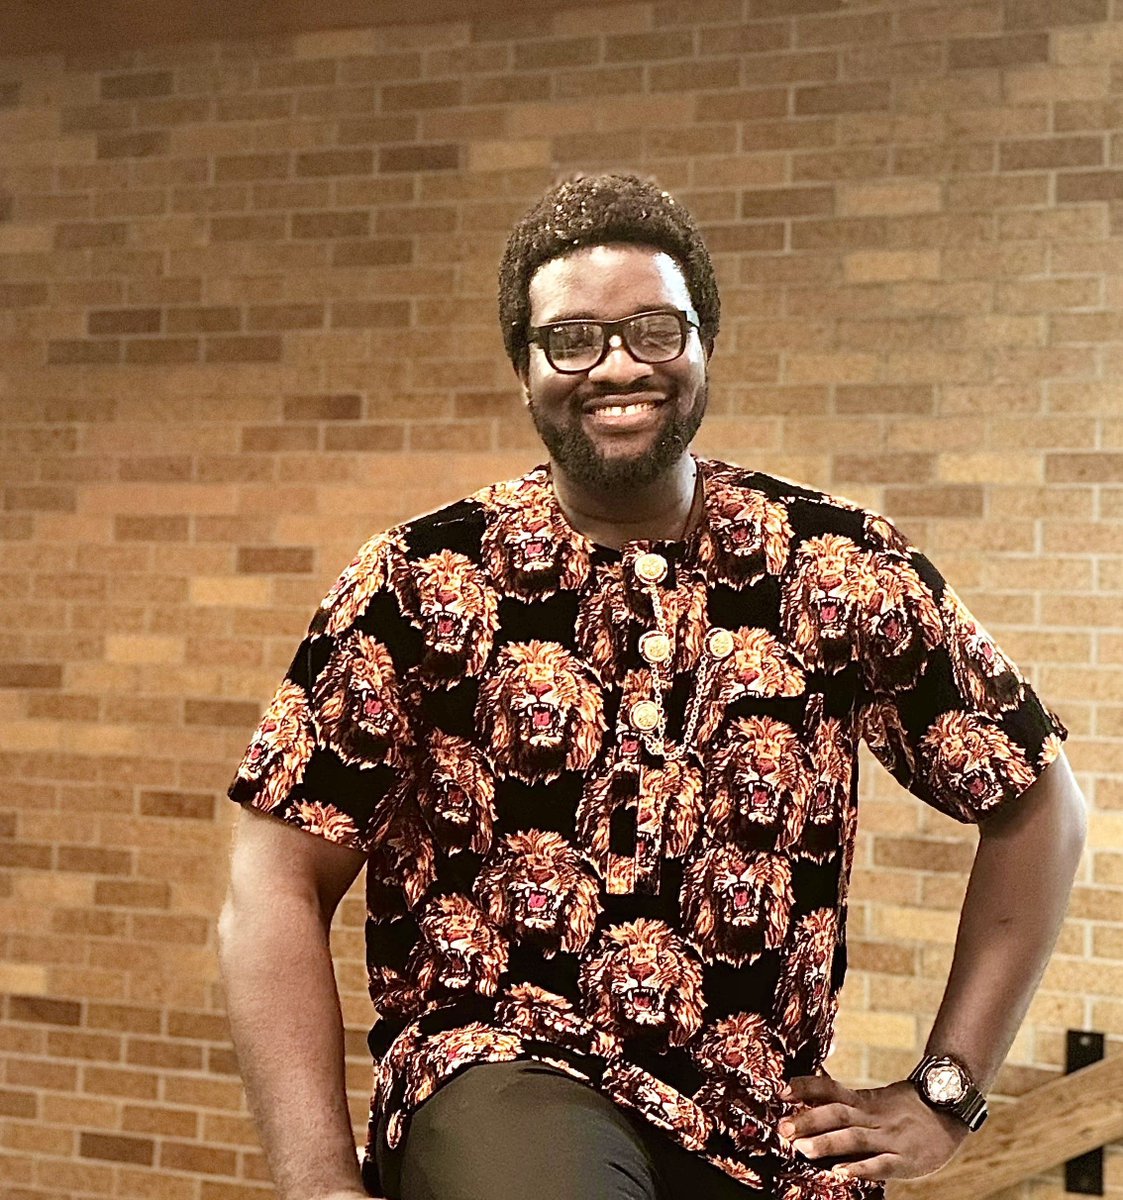 Meet @ChukwuOtutoA, Health Policy PhD student at @ihpmeuoft. As a 2023 Vanier Scholar, recipient of the 2023 IDRC International Doctoral Research Award, and #embedded graduate student with #IHSPR, Otuto is dedicated to shaping the future of health policy research! #BHM2024